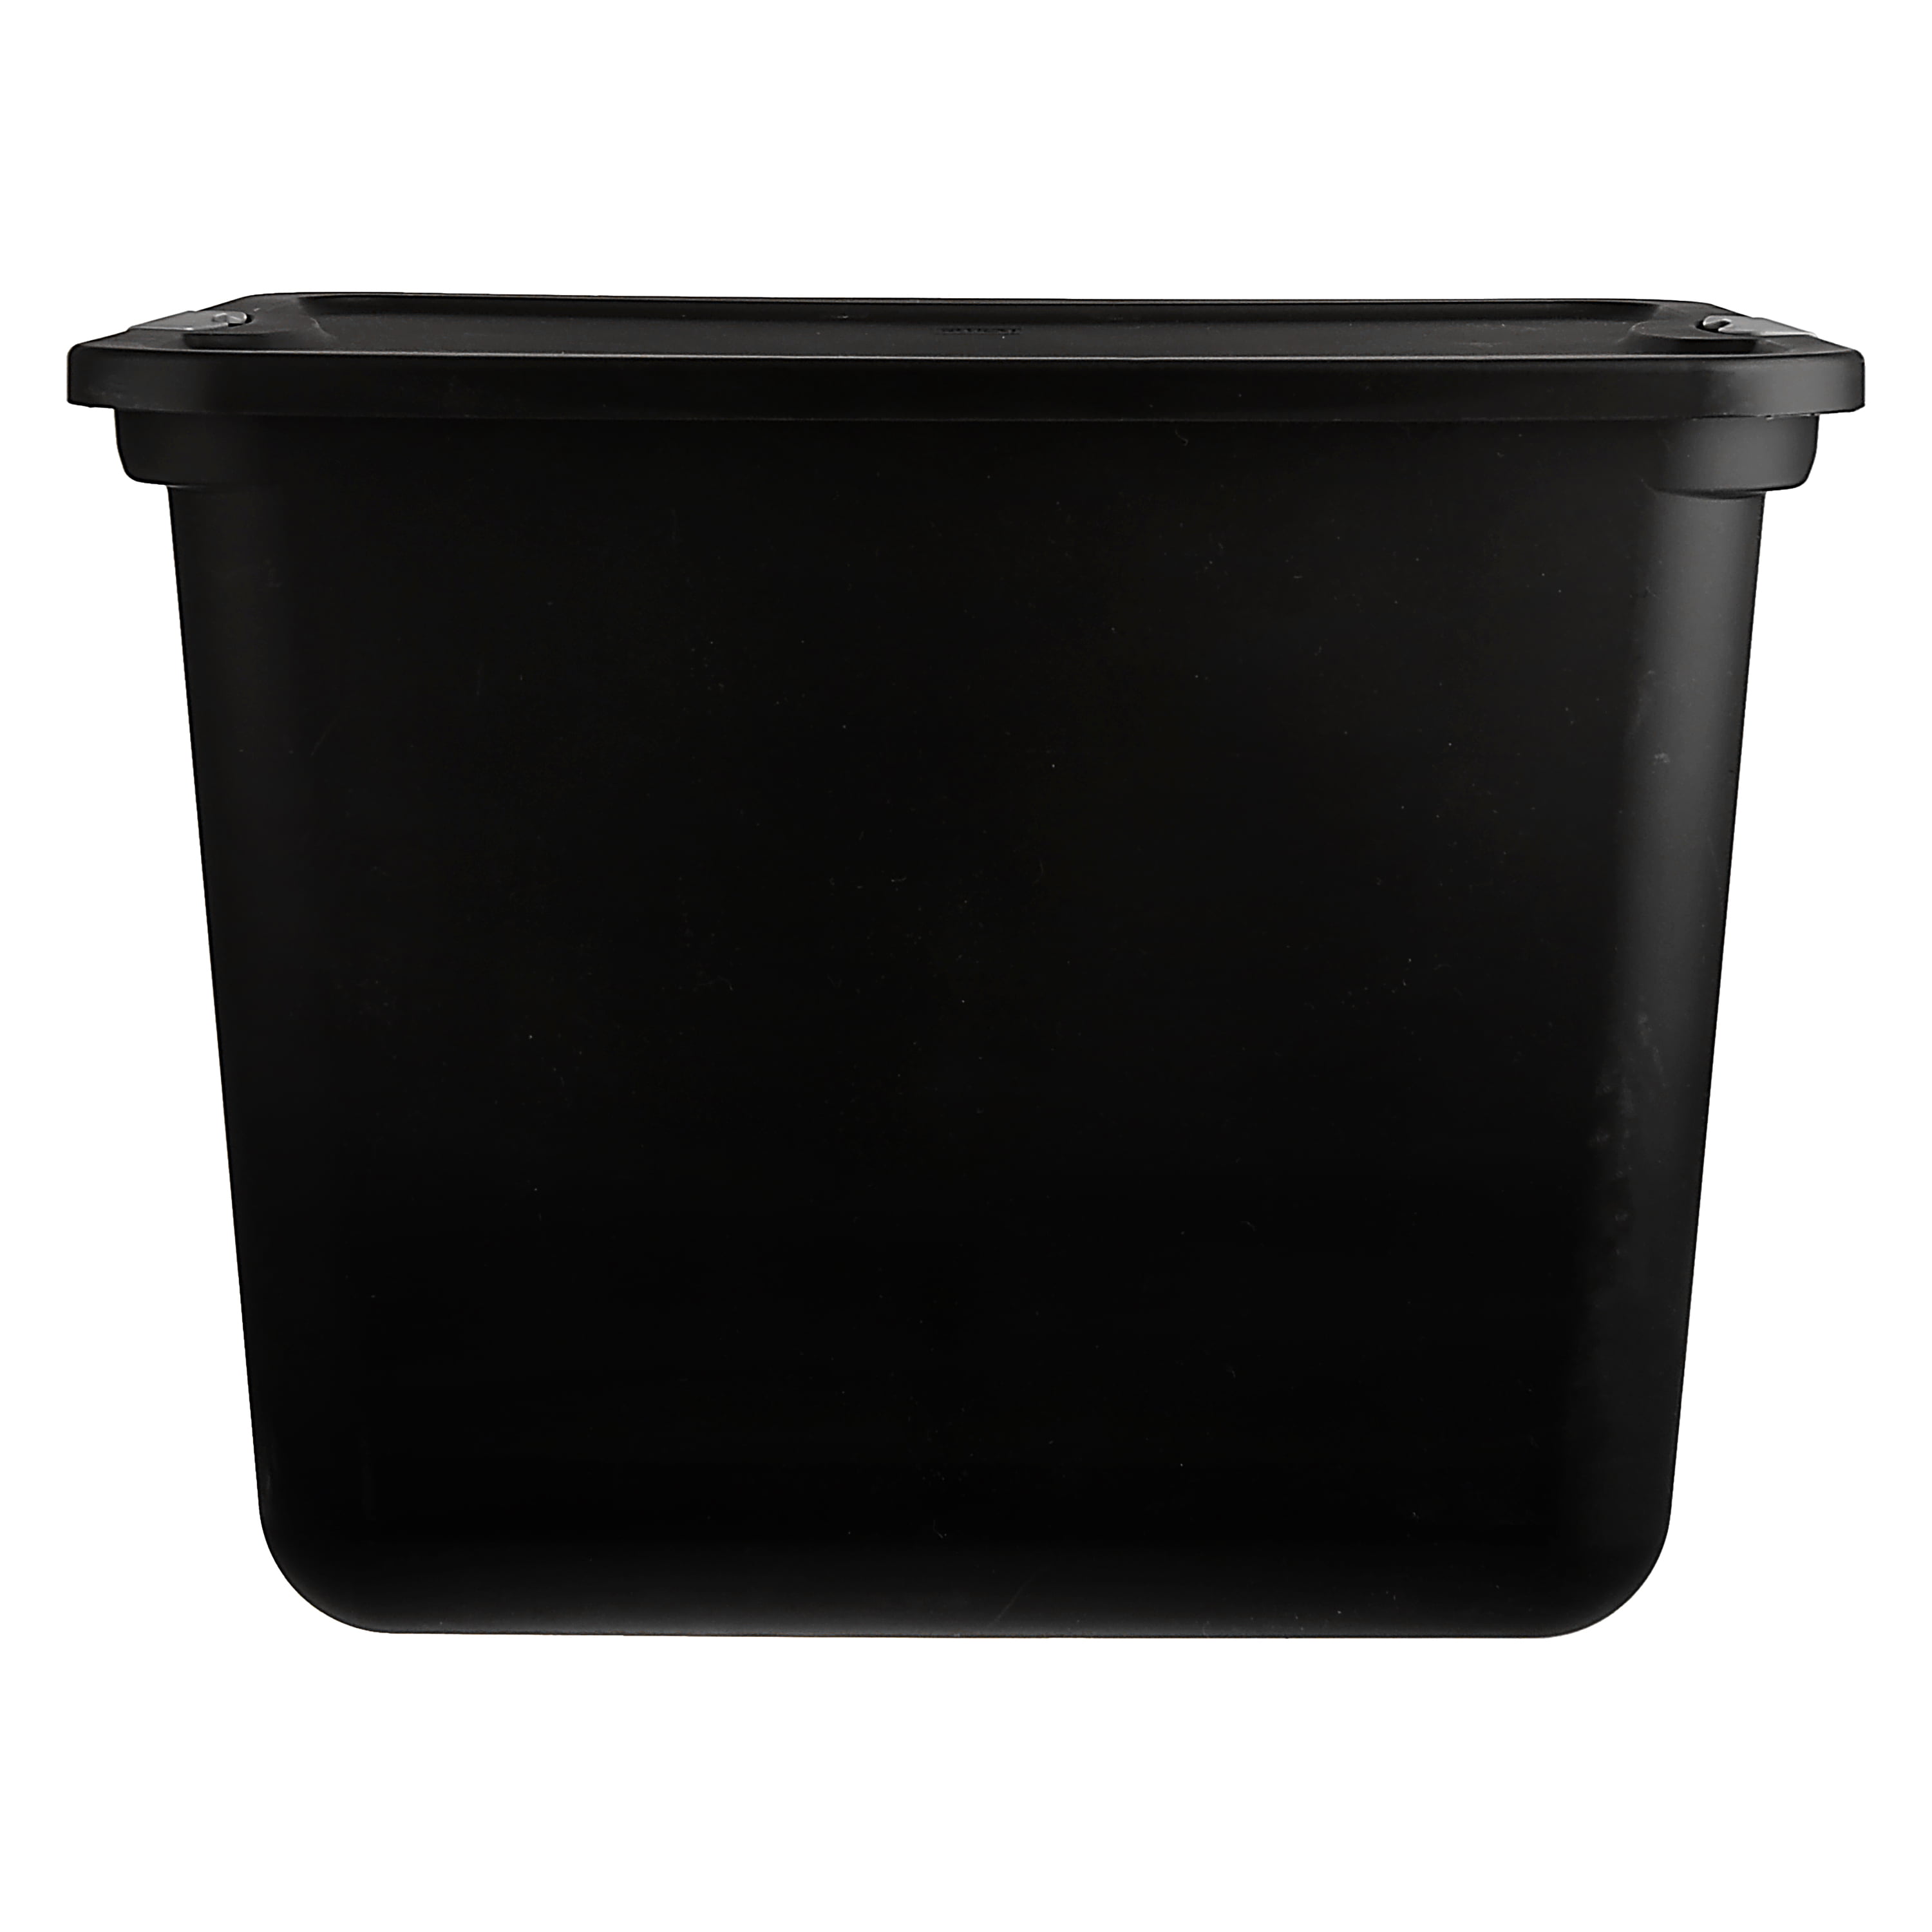 Mainstays 20 Gallon Latching Storage Container, Black Base and Lid 